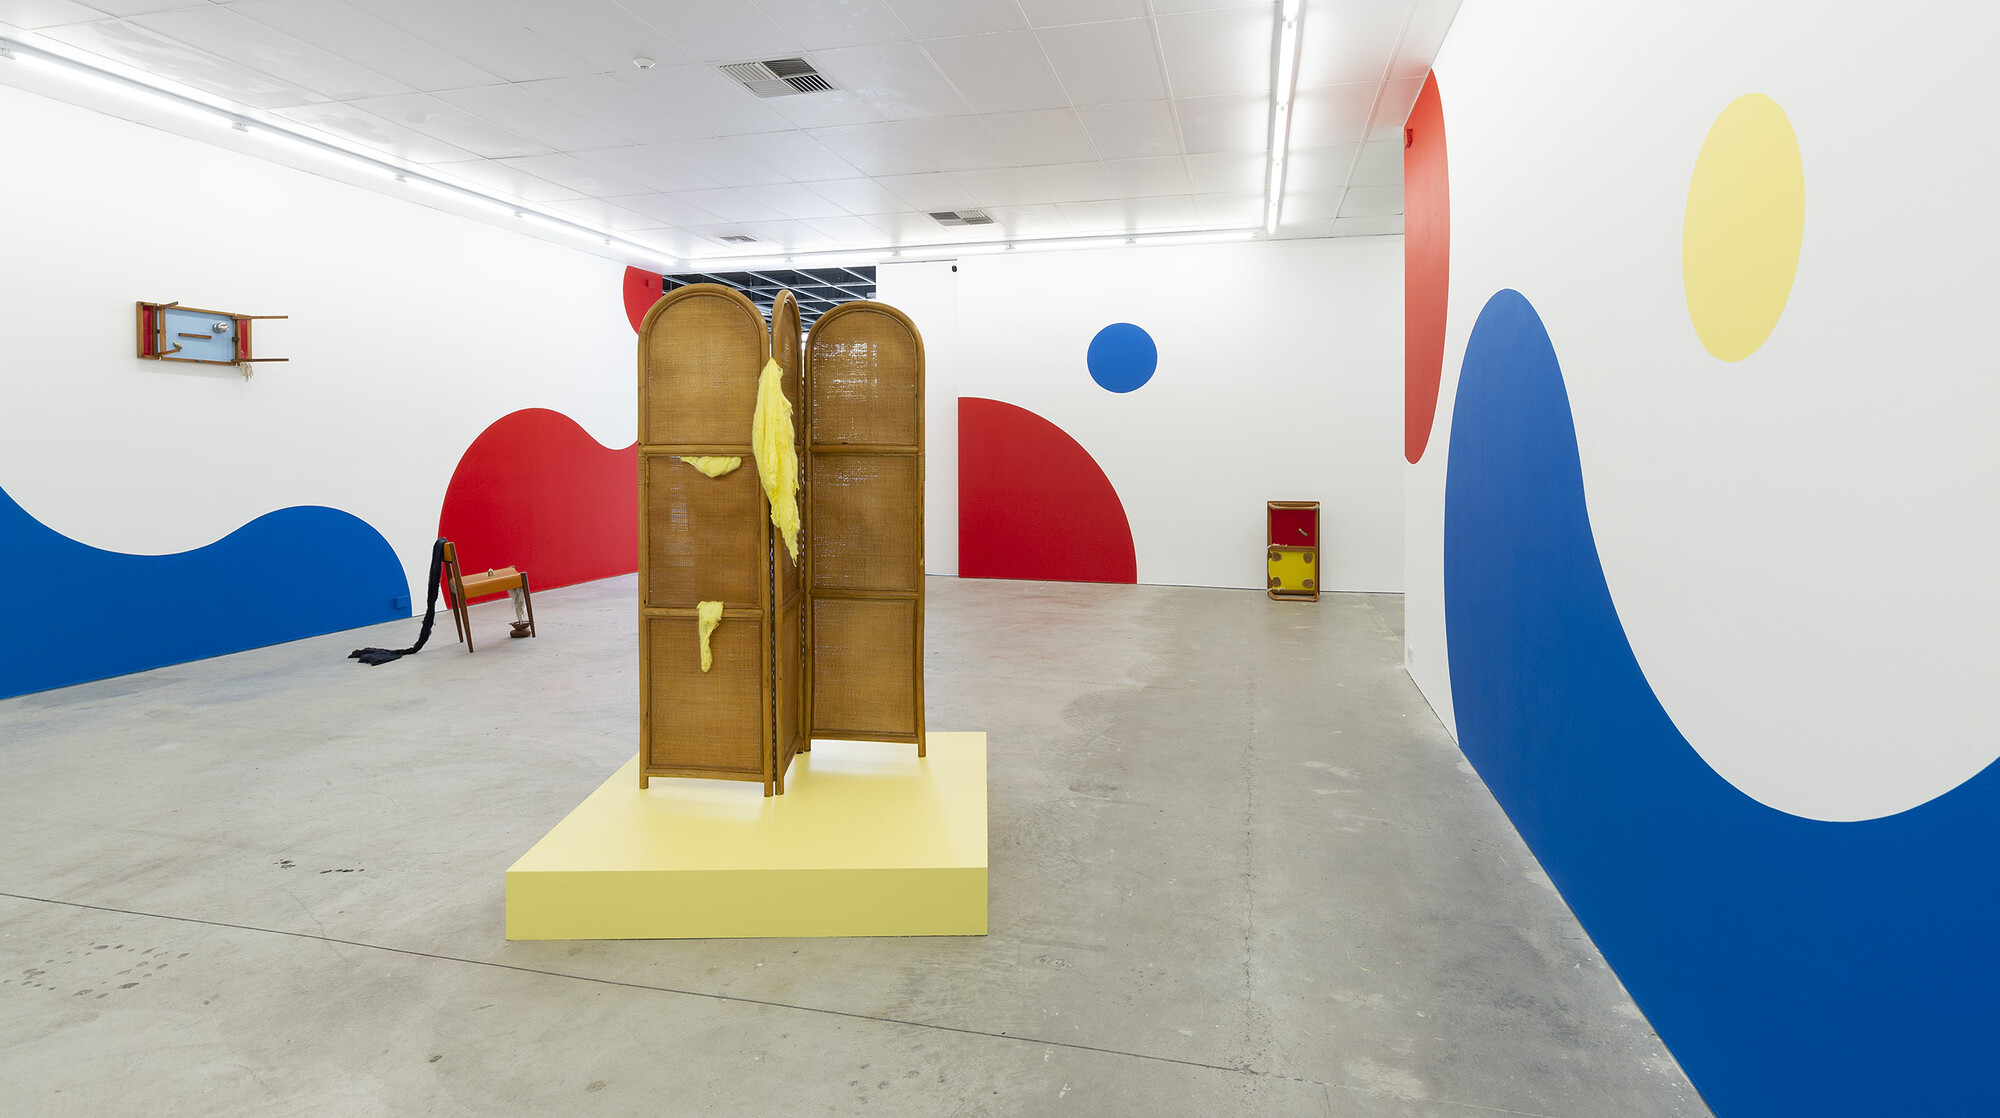 Installation view of Vittoria Di Stefano’s <em>The Palace at 4pm</em> at Gertrude Contemporary, 2022. Image: Christian Capurro. Courtesy of Gertrude and the artist.